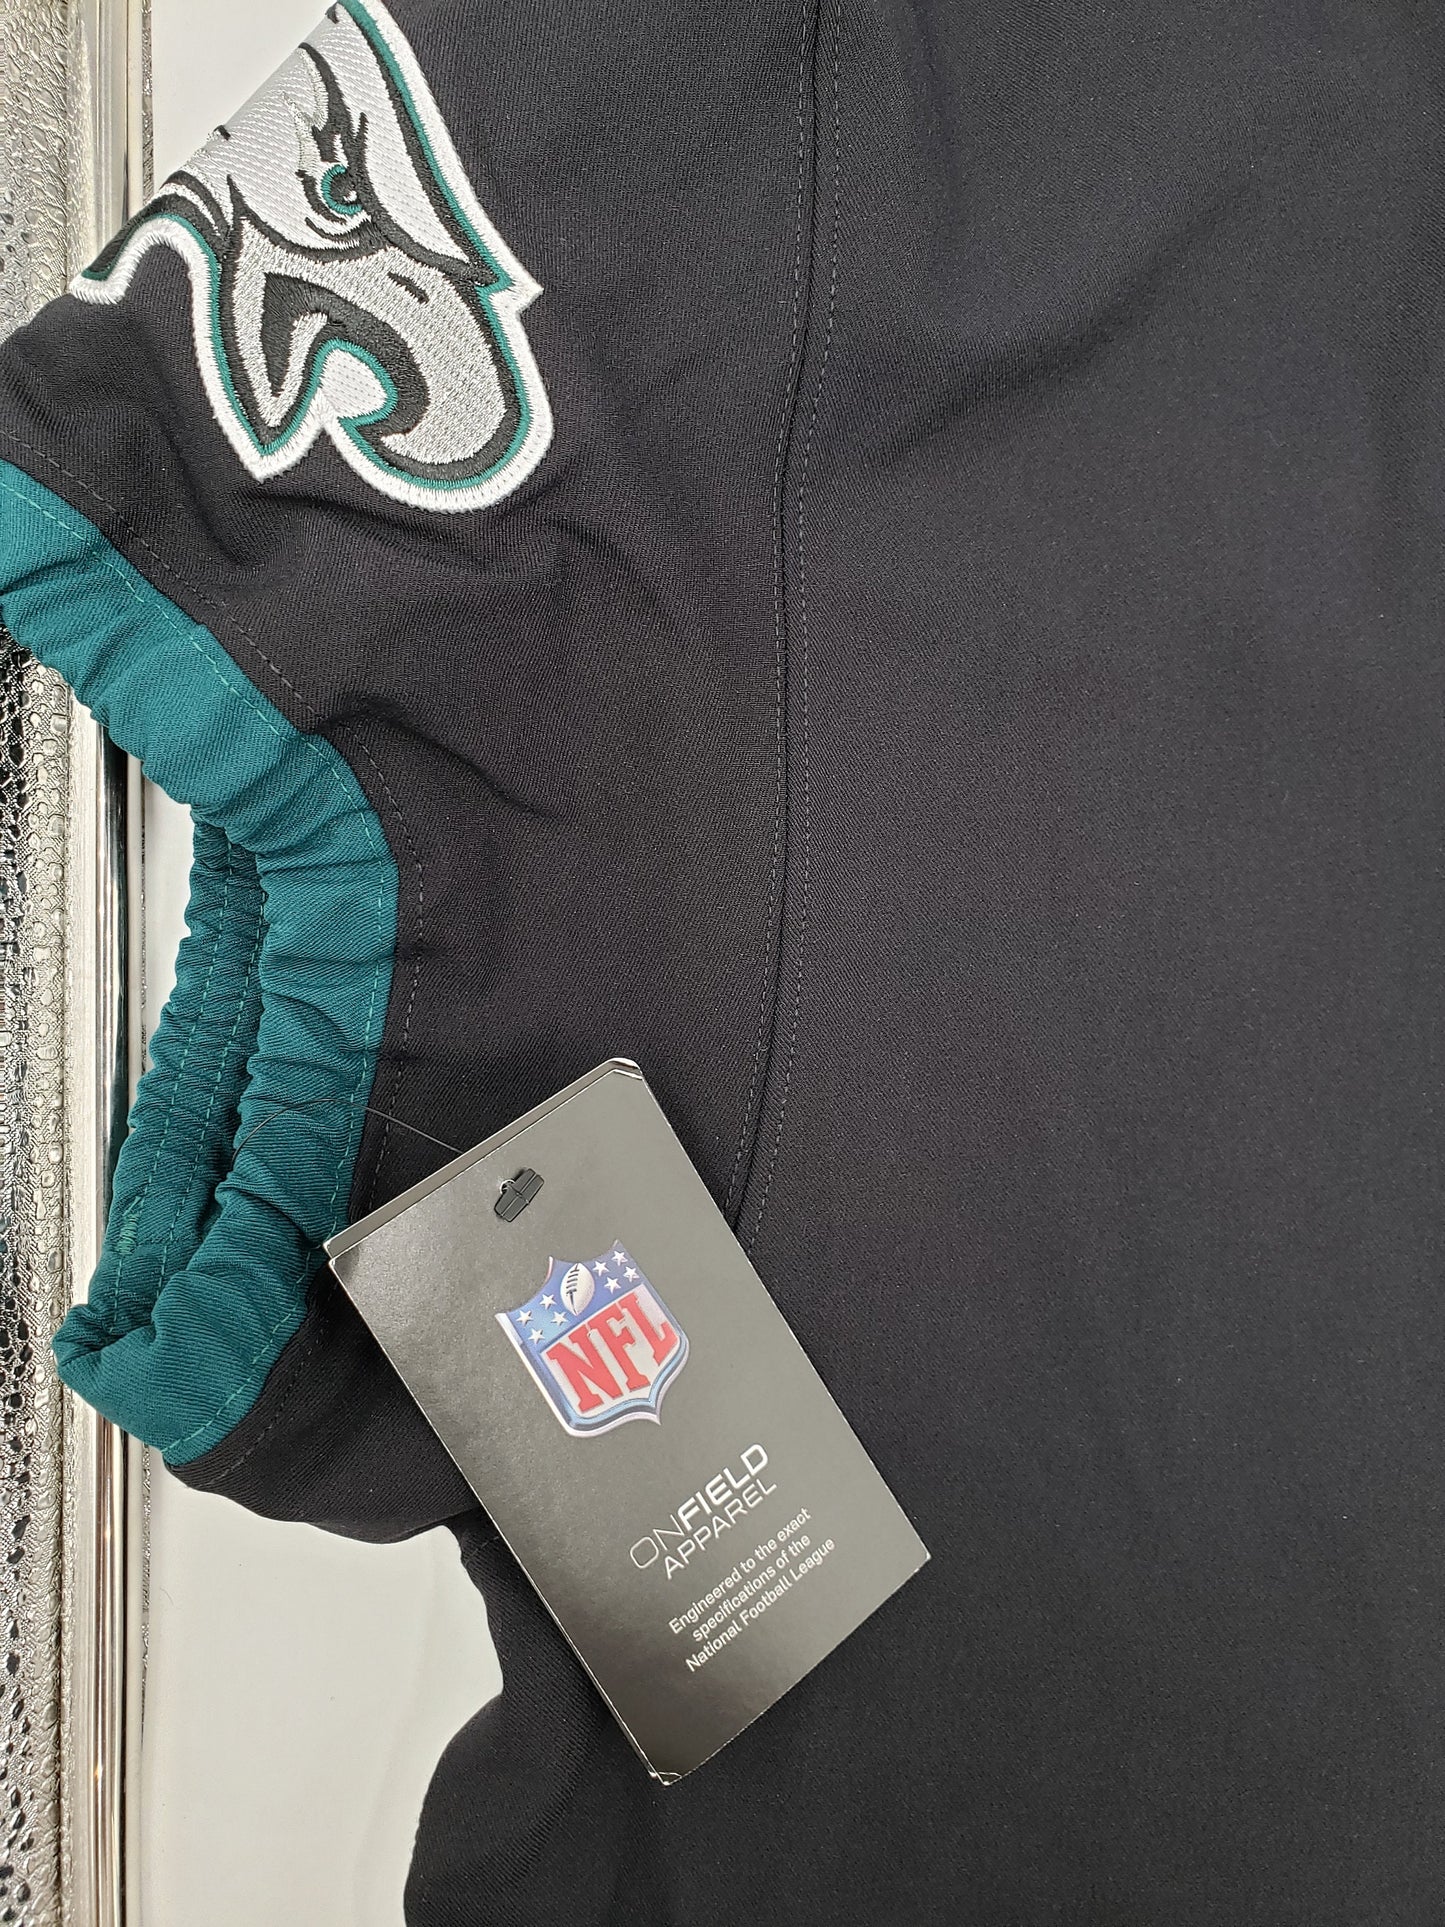 Philadelphia Eagles #11 Football Jersey Mens Size 56 Black Blank Custom Collectible NFL On Field Apparel Perfect Birthday Gift